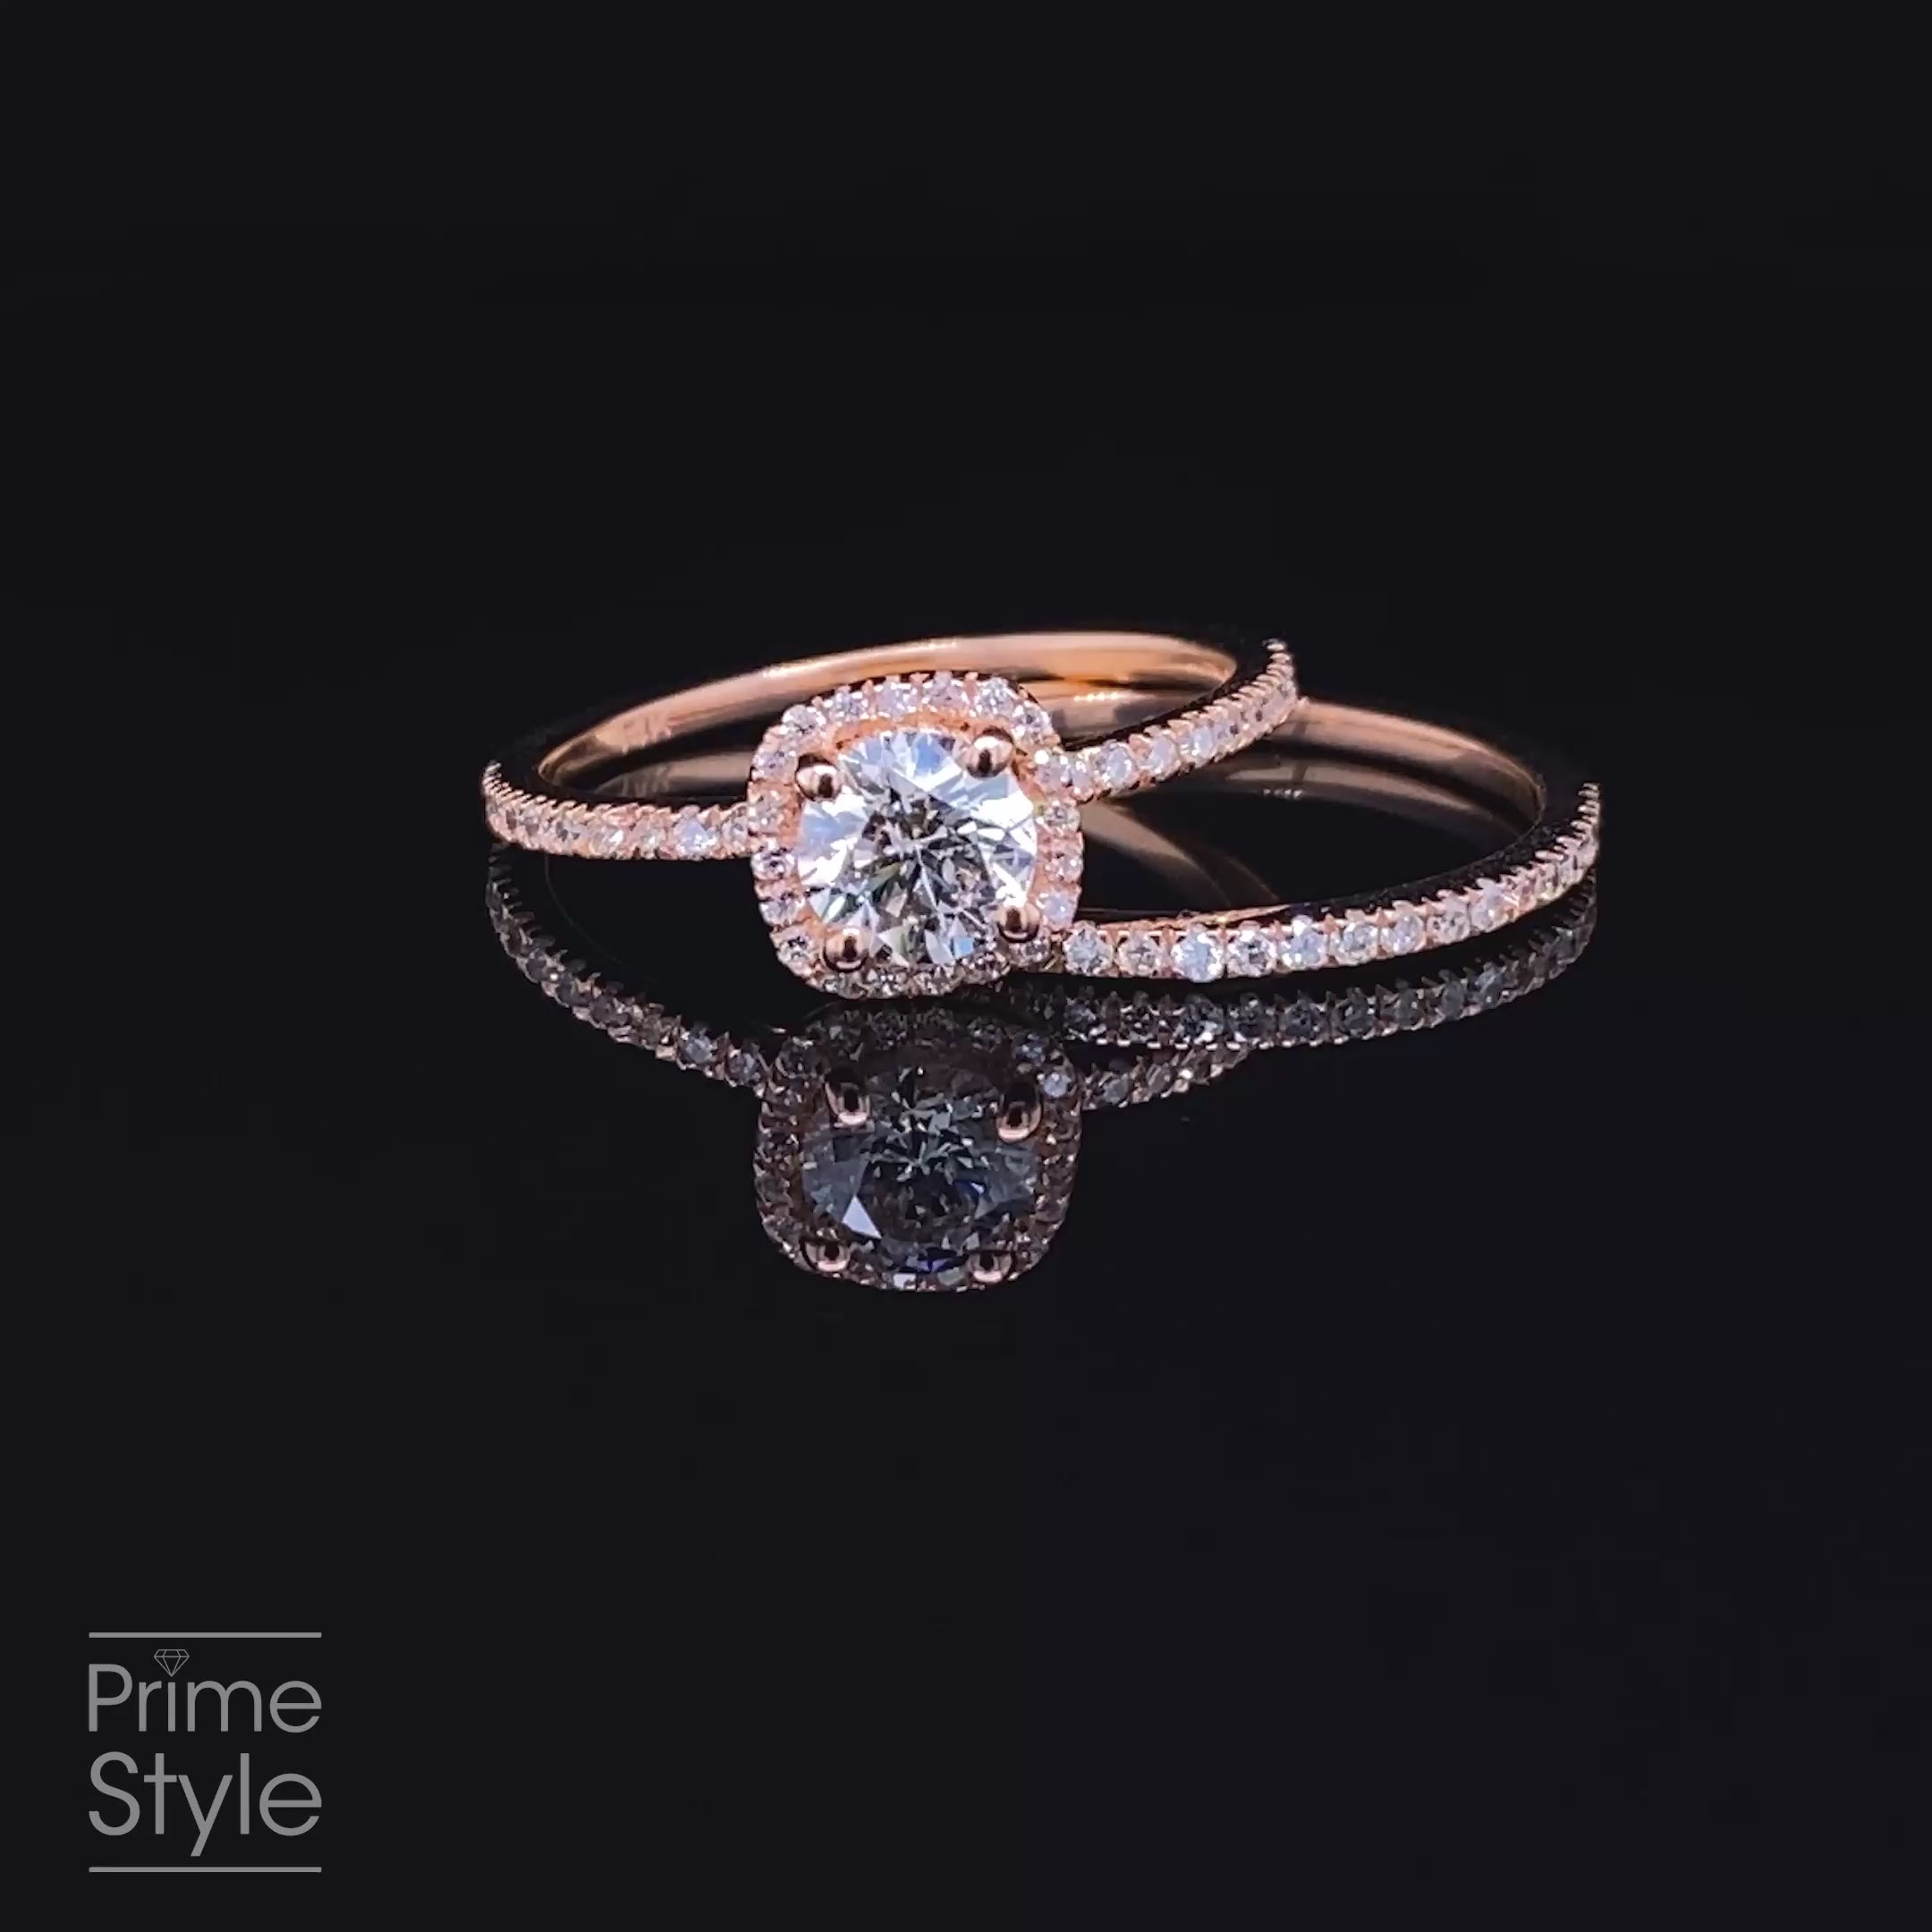 Limited 1.05CT Round Cut Diamond Bridal Set in 14kt Rose Gold